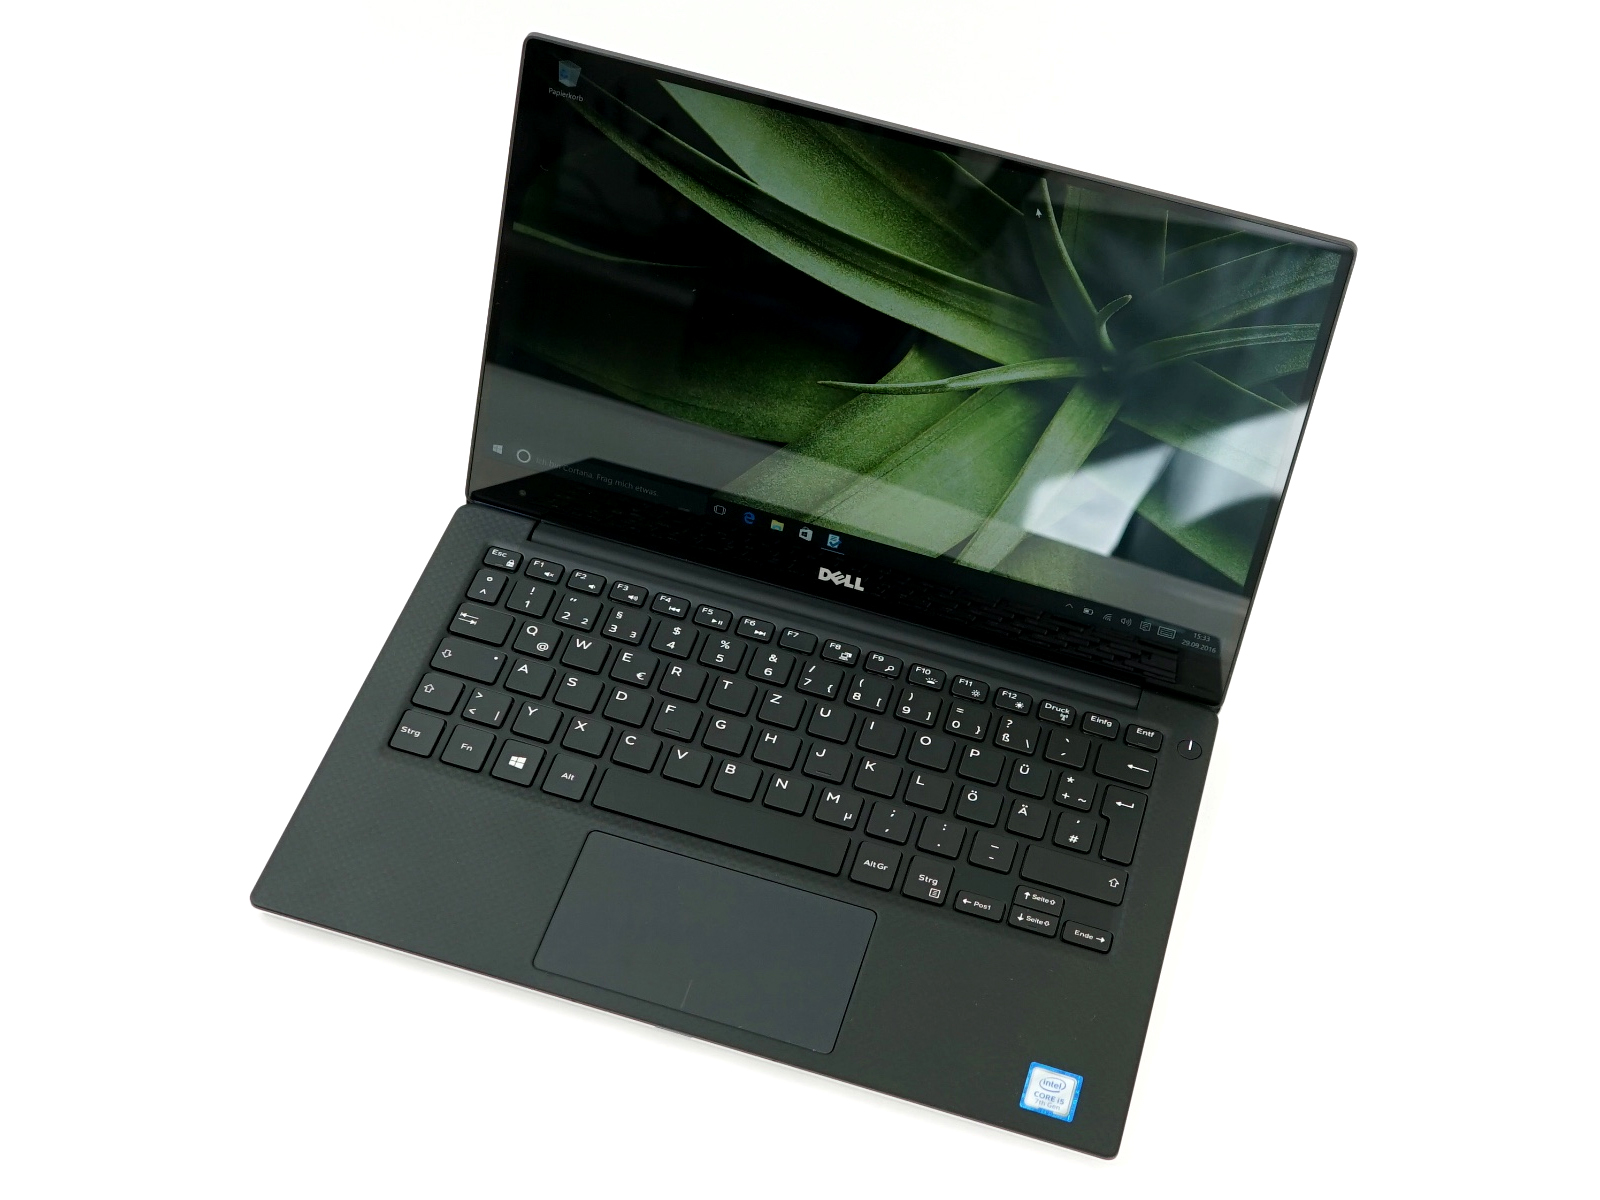 Dell Xps 13 9360 Qhd I5 70u Notebook Review Notebookcheck Net Reviews